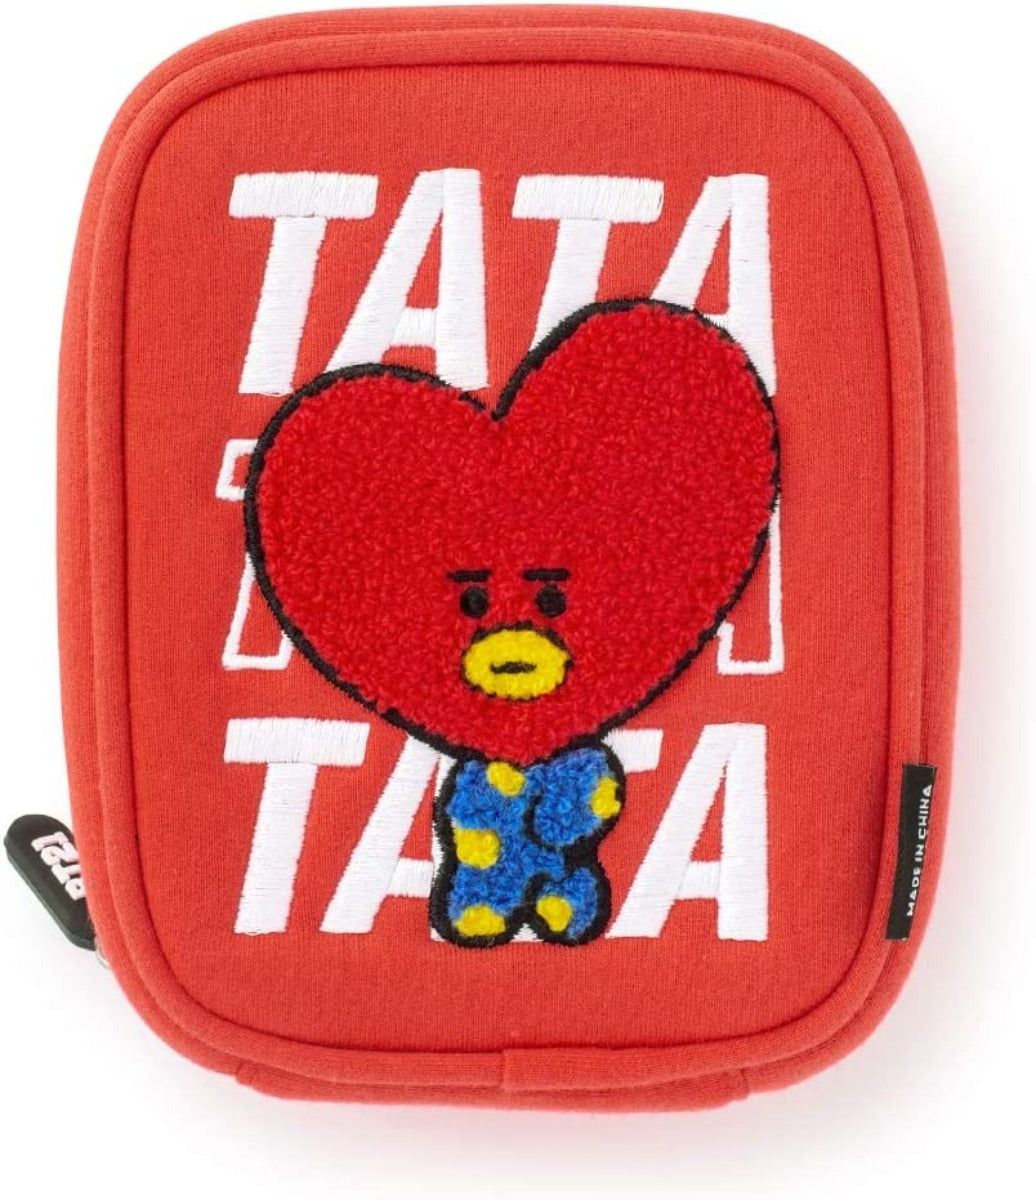 Cable Pouch BT21 Tata Red/White